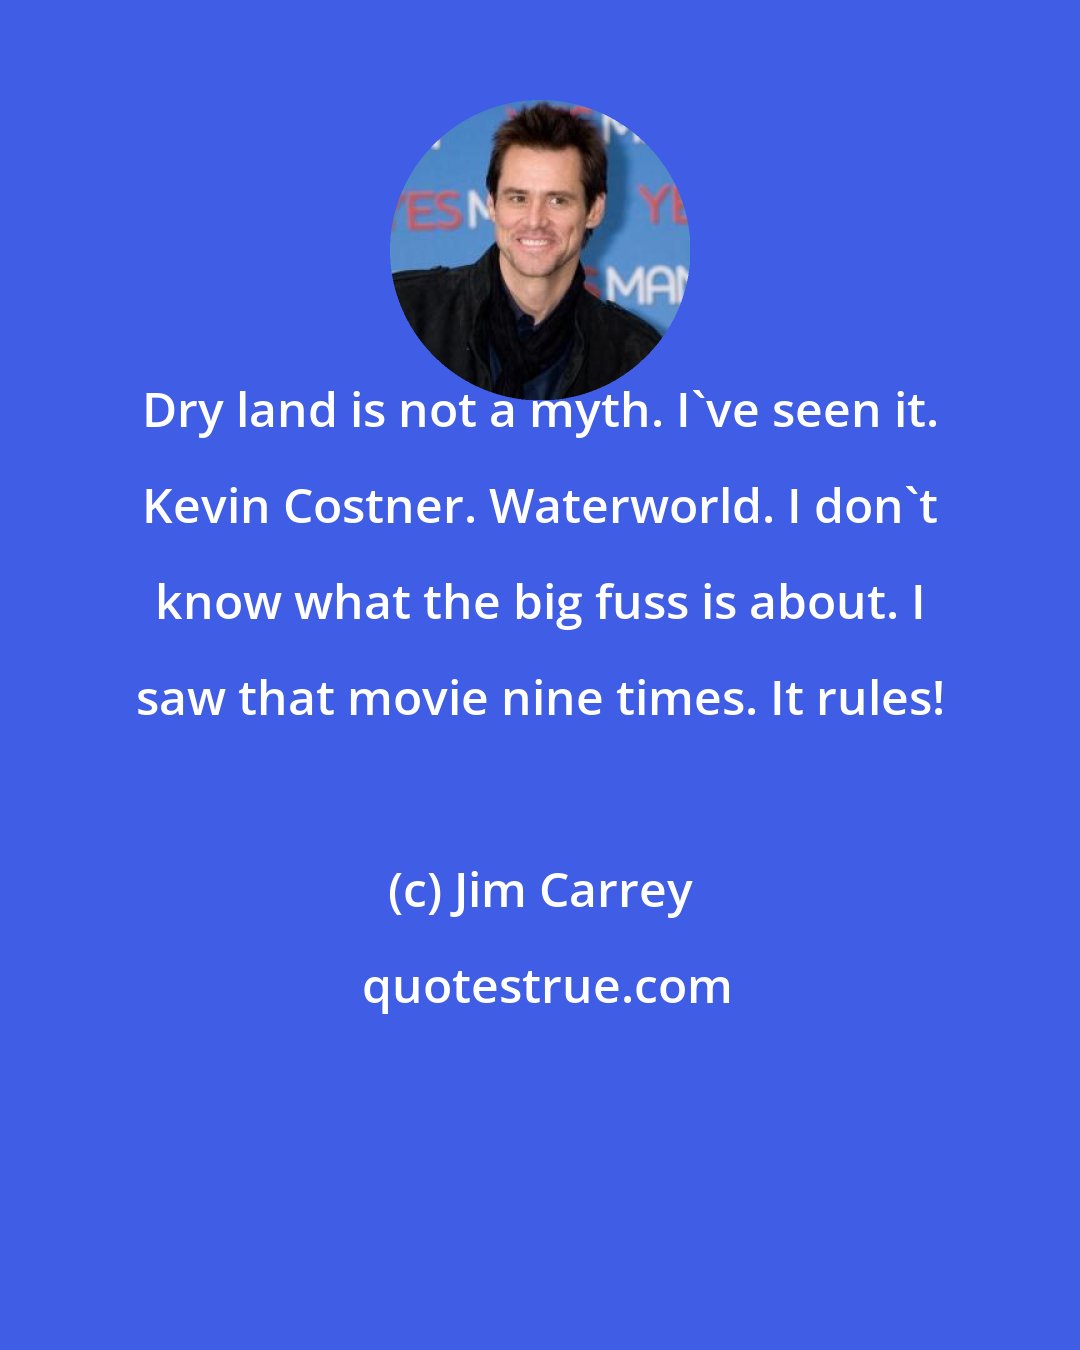 Jim Carrey: Dry land is not a myth. I've seen it. Kevin Costner. Waterworld. I don't know what the big fuss is about. I saw that movie nine times. It rules!